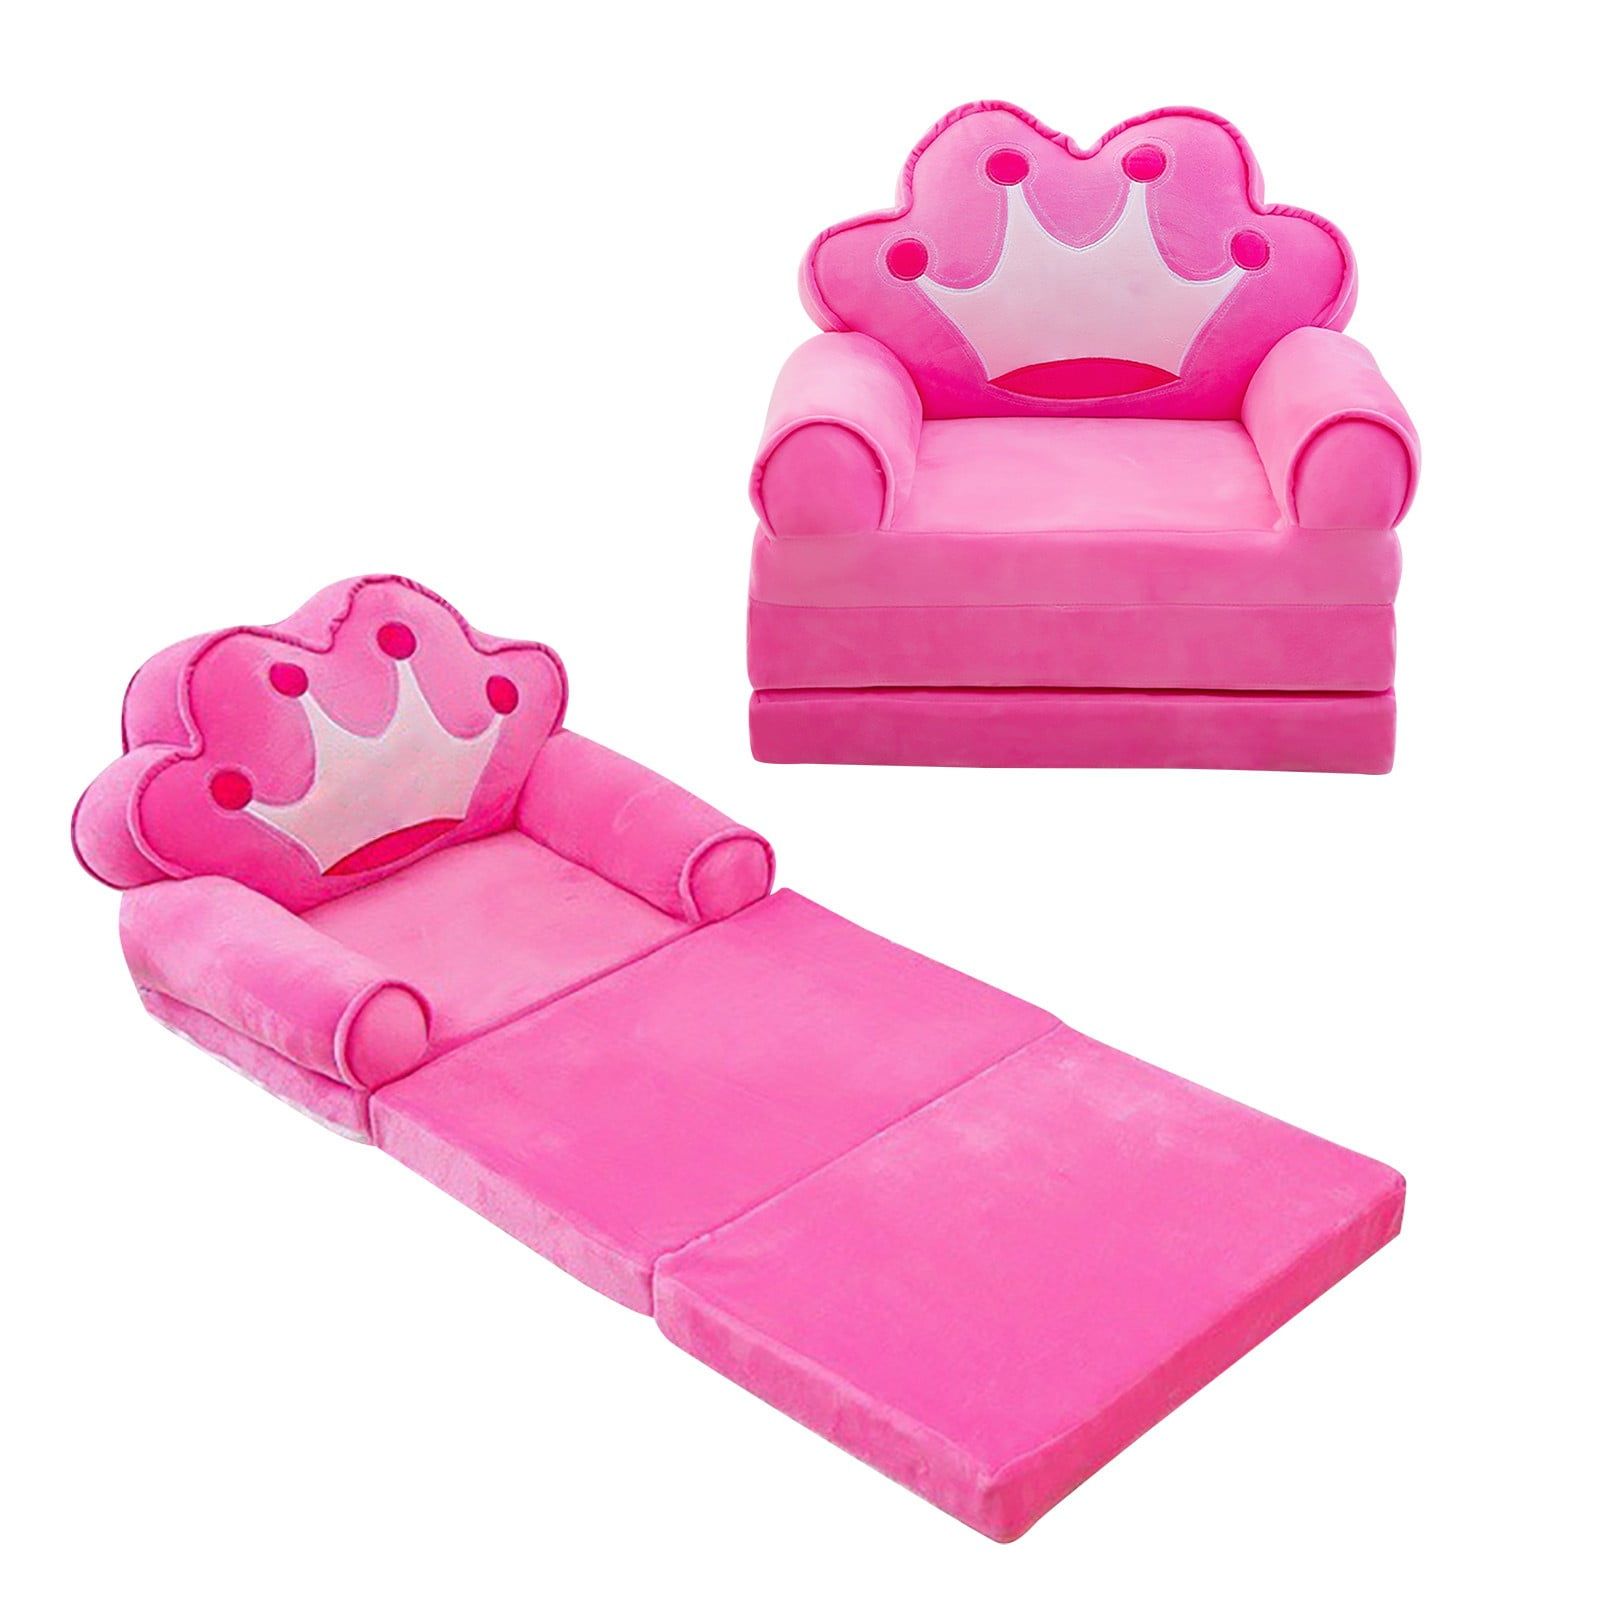 Plush Foldable Kids Sofa Backrest Armchair 2 In 1 Foldable Children Intended For 2 In 1 Foldable Children's Sofa Beds (View 10 of 20)